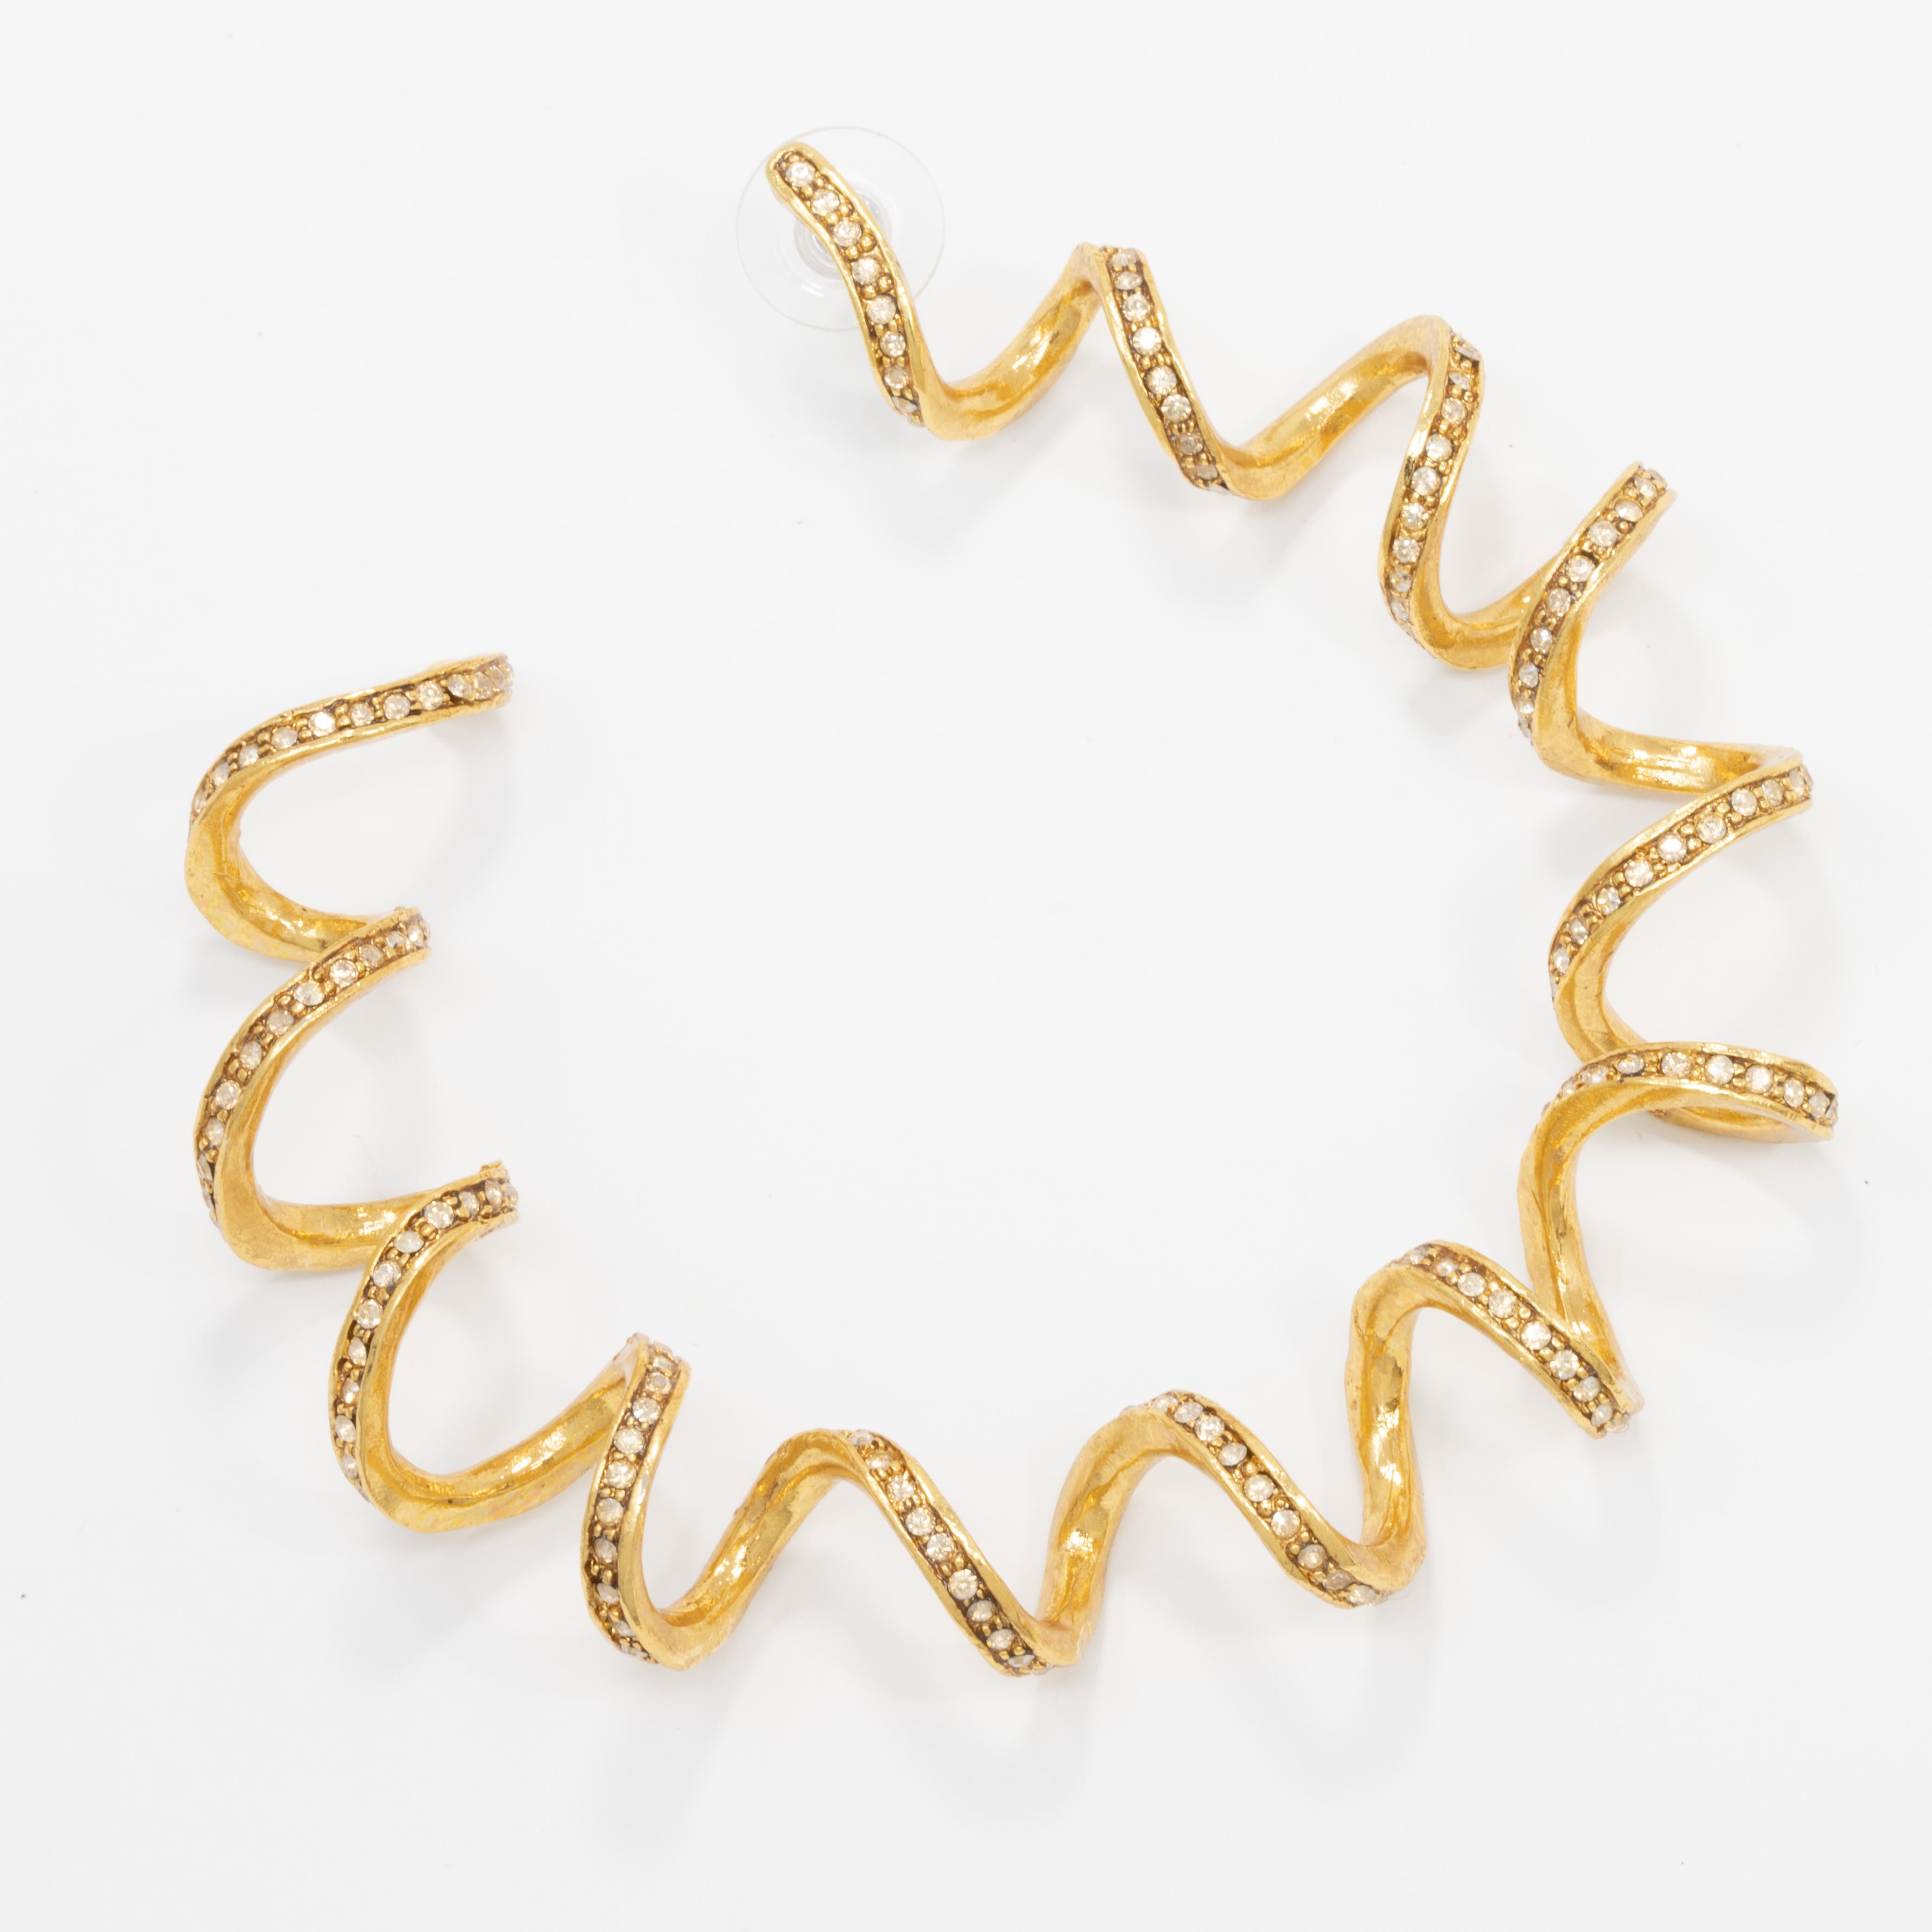 Bold twisted curl hoop earrings accented with clear Swarovski crystals. Add a golden glow to your outfit!

By Oscar de la Renta.

Gold plated. Post backs.

Hallmarks: none